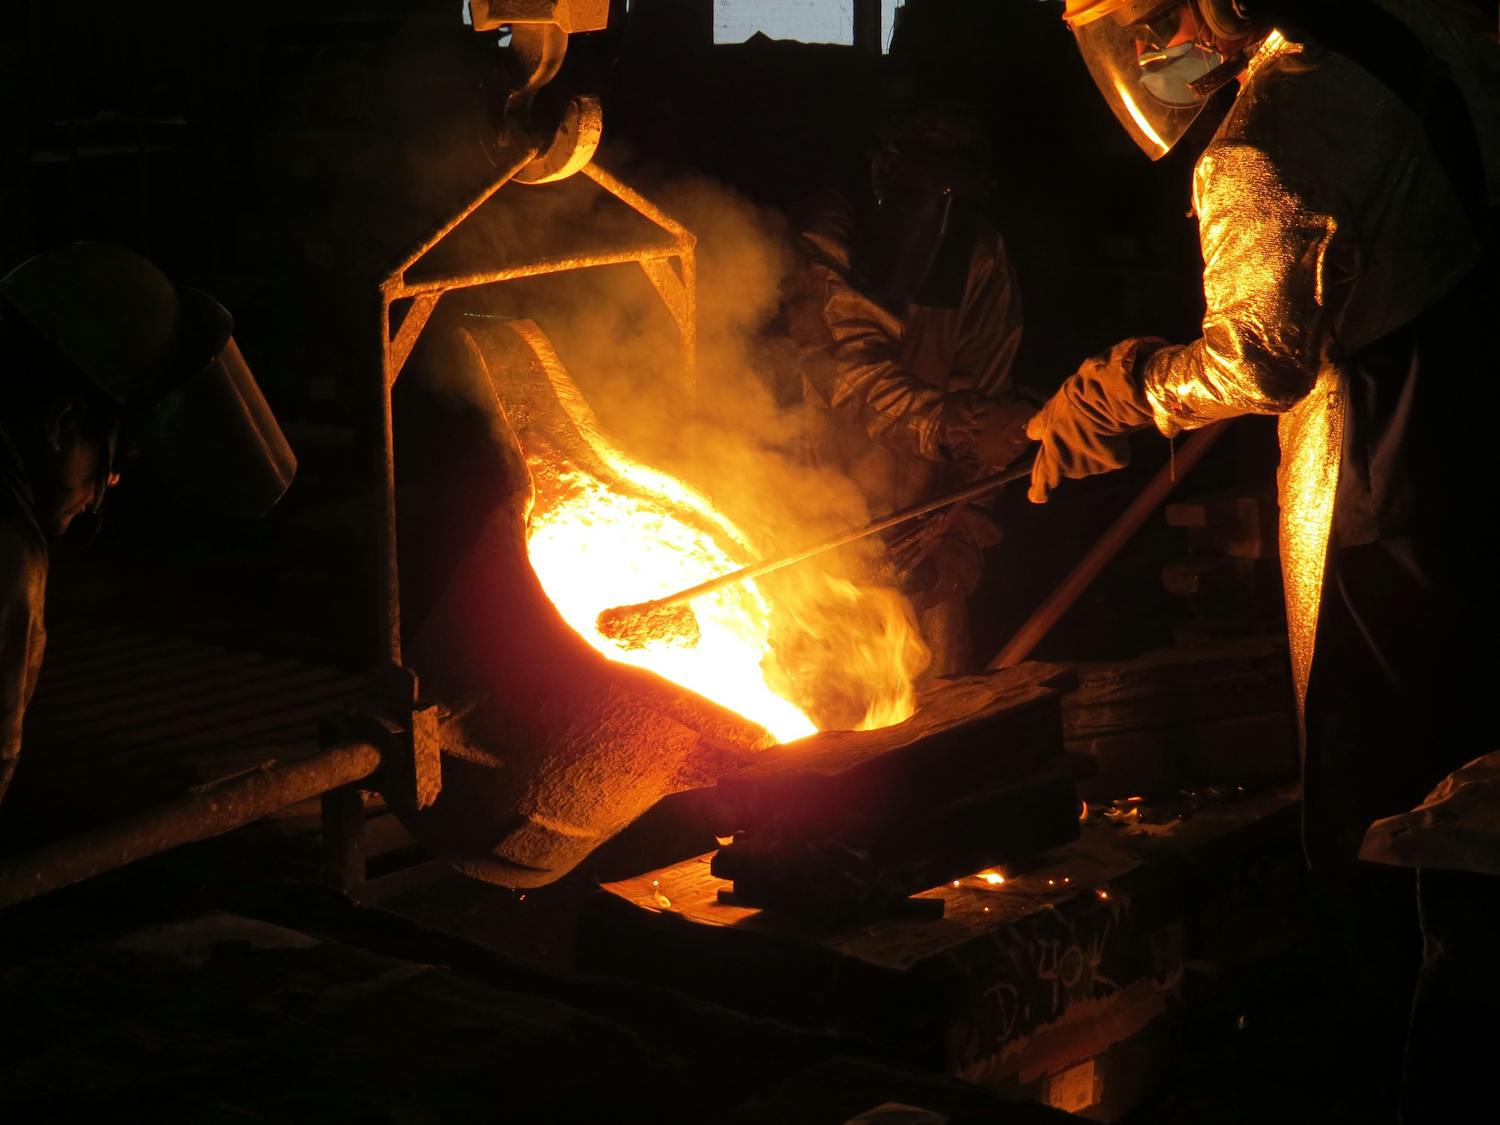 A UK support package for Tata Steel is being created